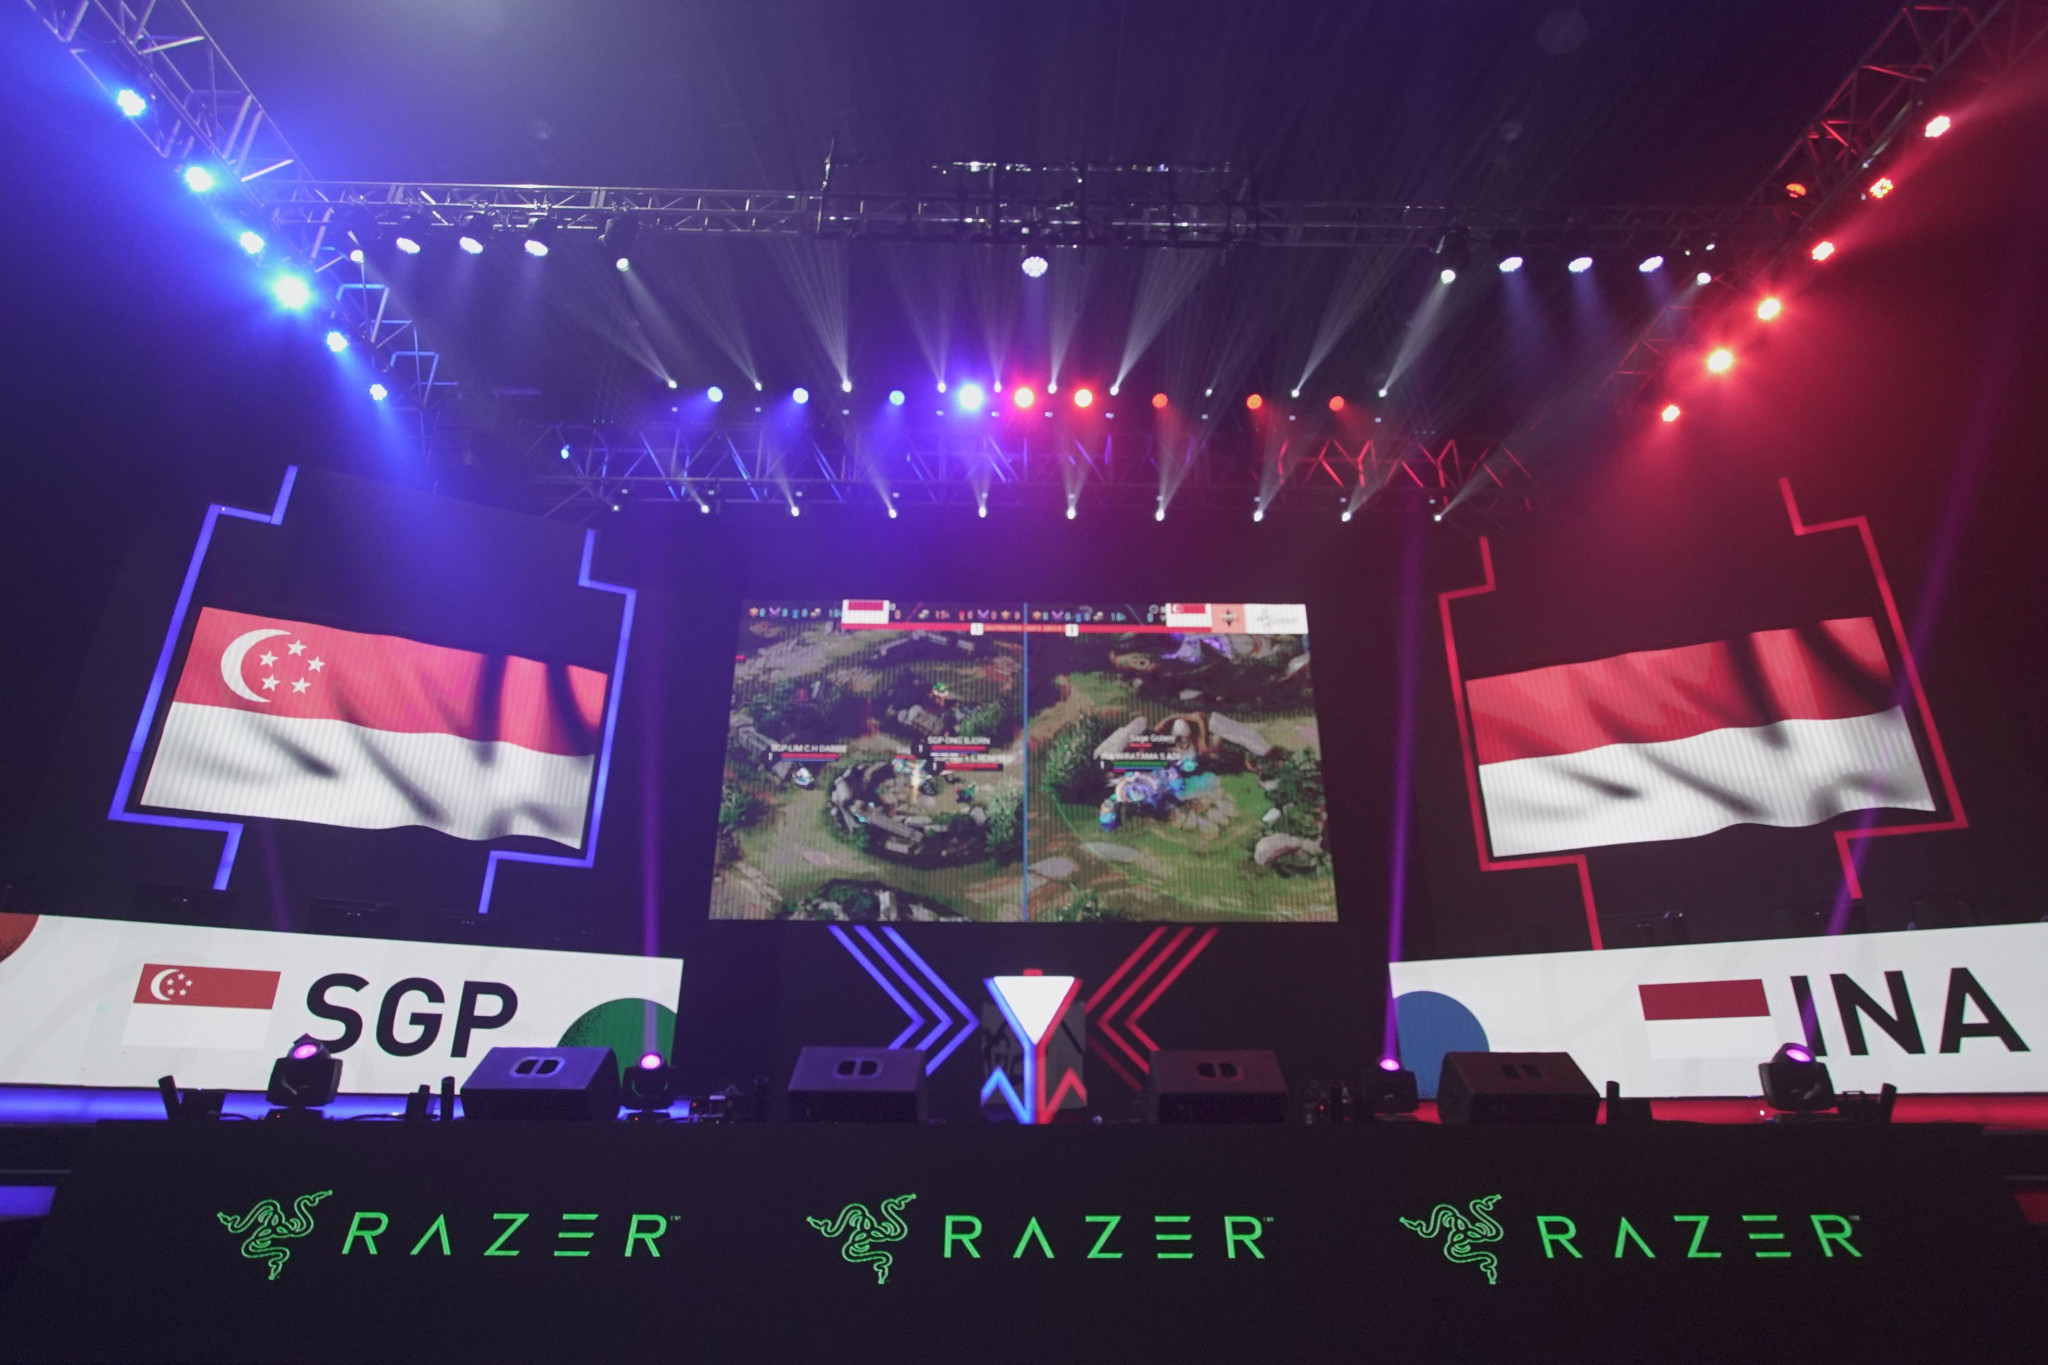 Indonesia won two silvers in the 2019 Southeast Asian Games in Manila, where esports was a full medal event ©Twitter